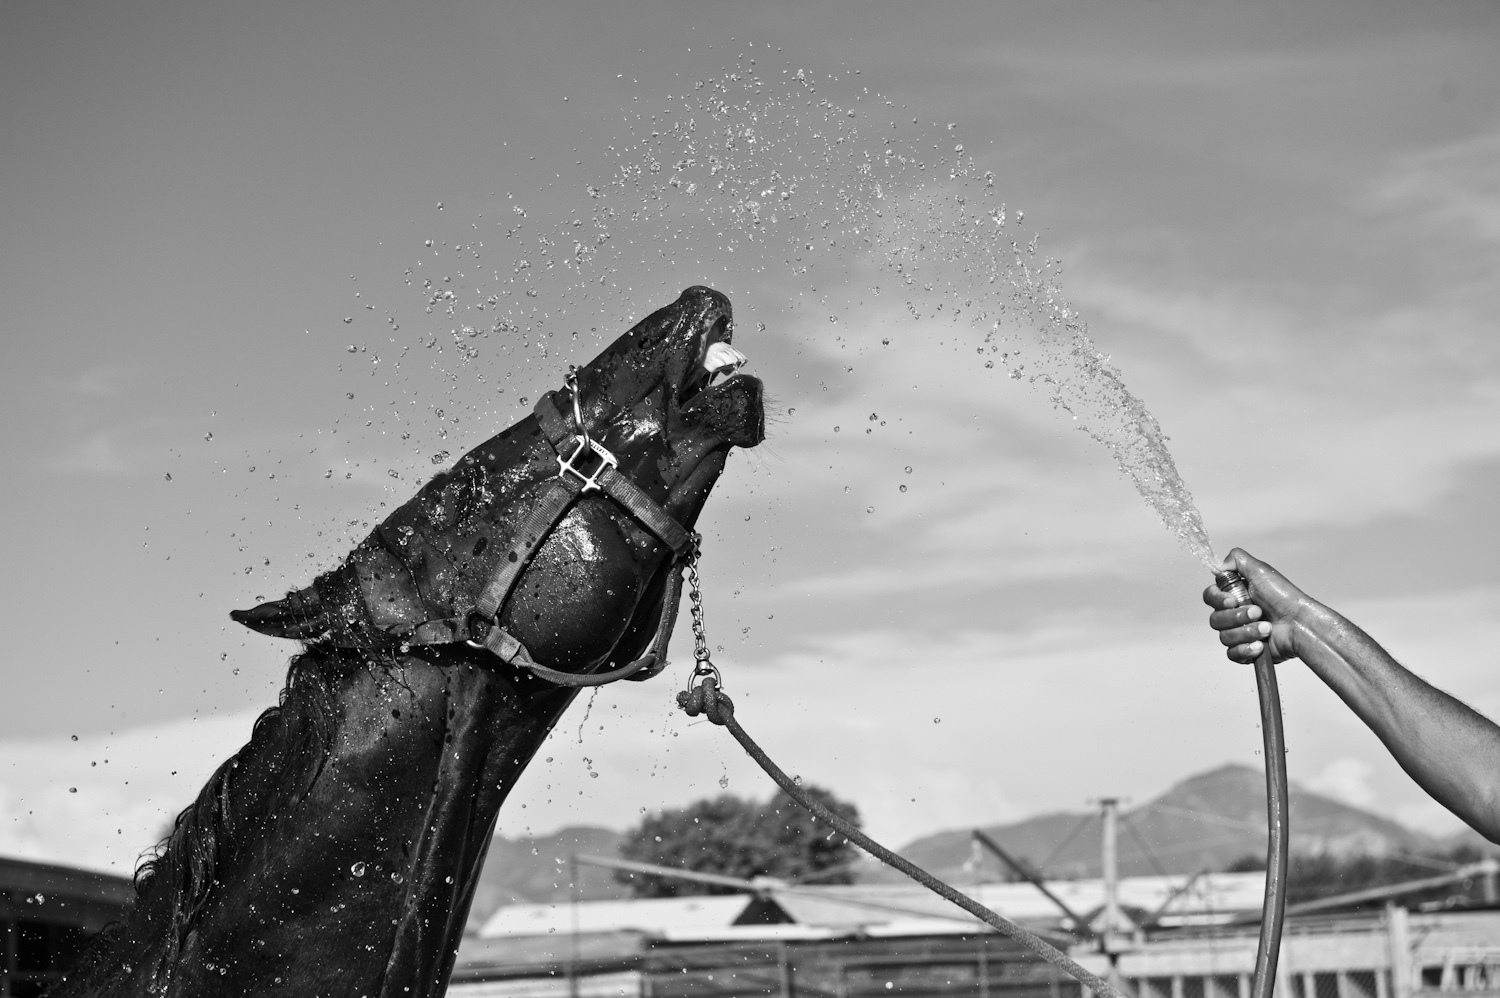  On a hot summer day, Jose Luis Pimentel cools down his horse. 